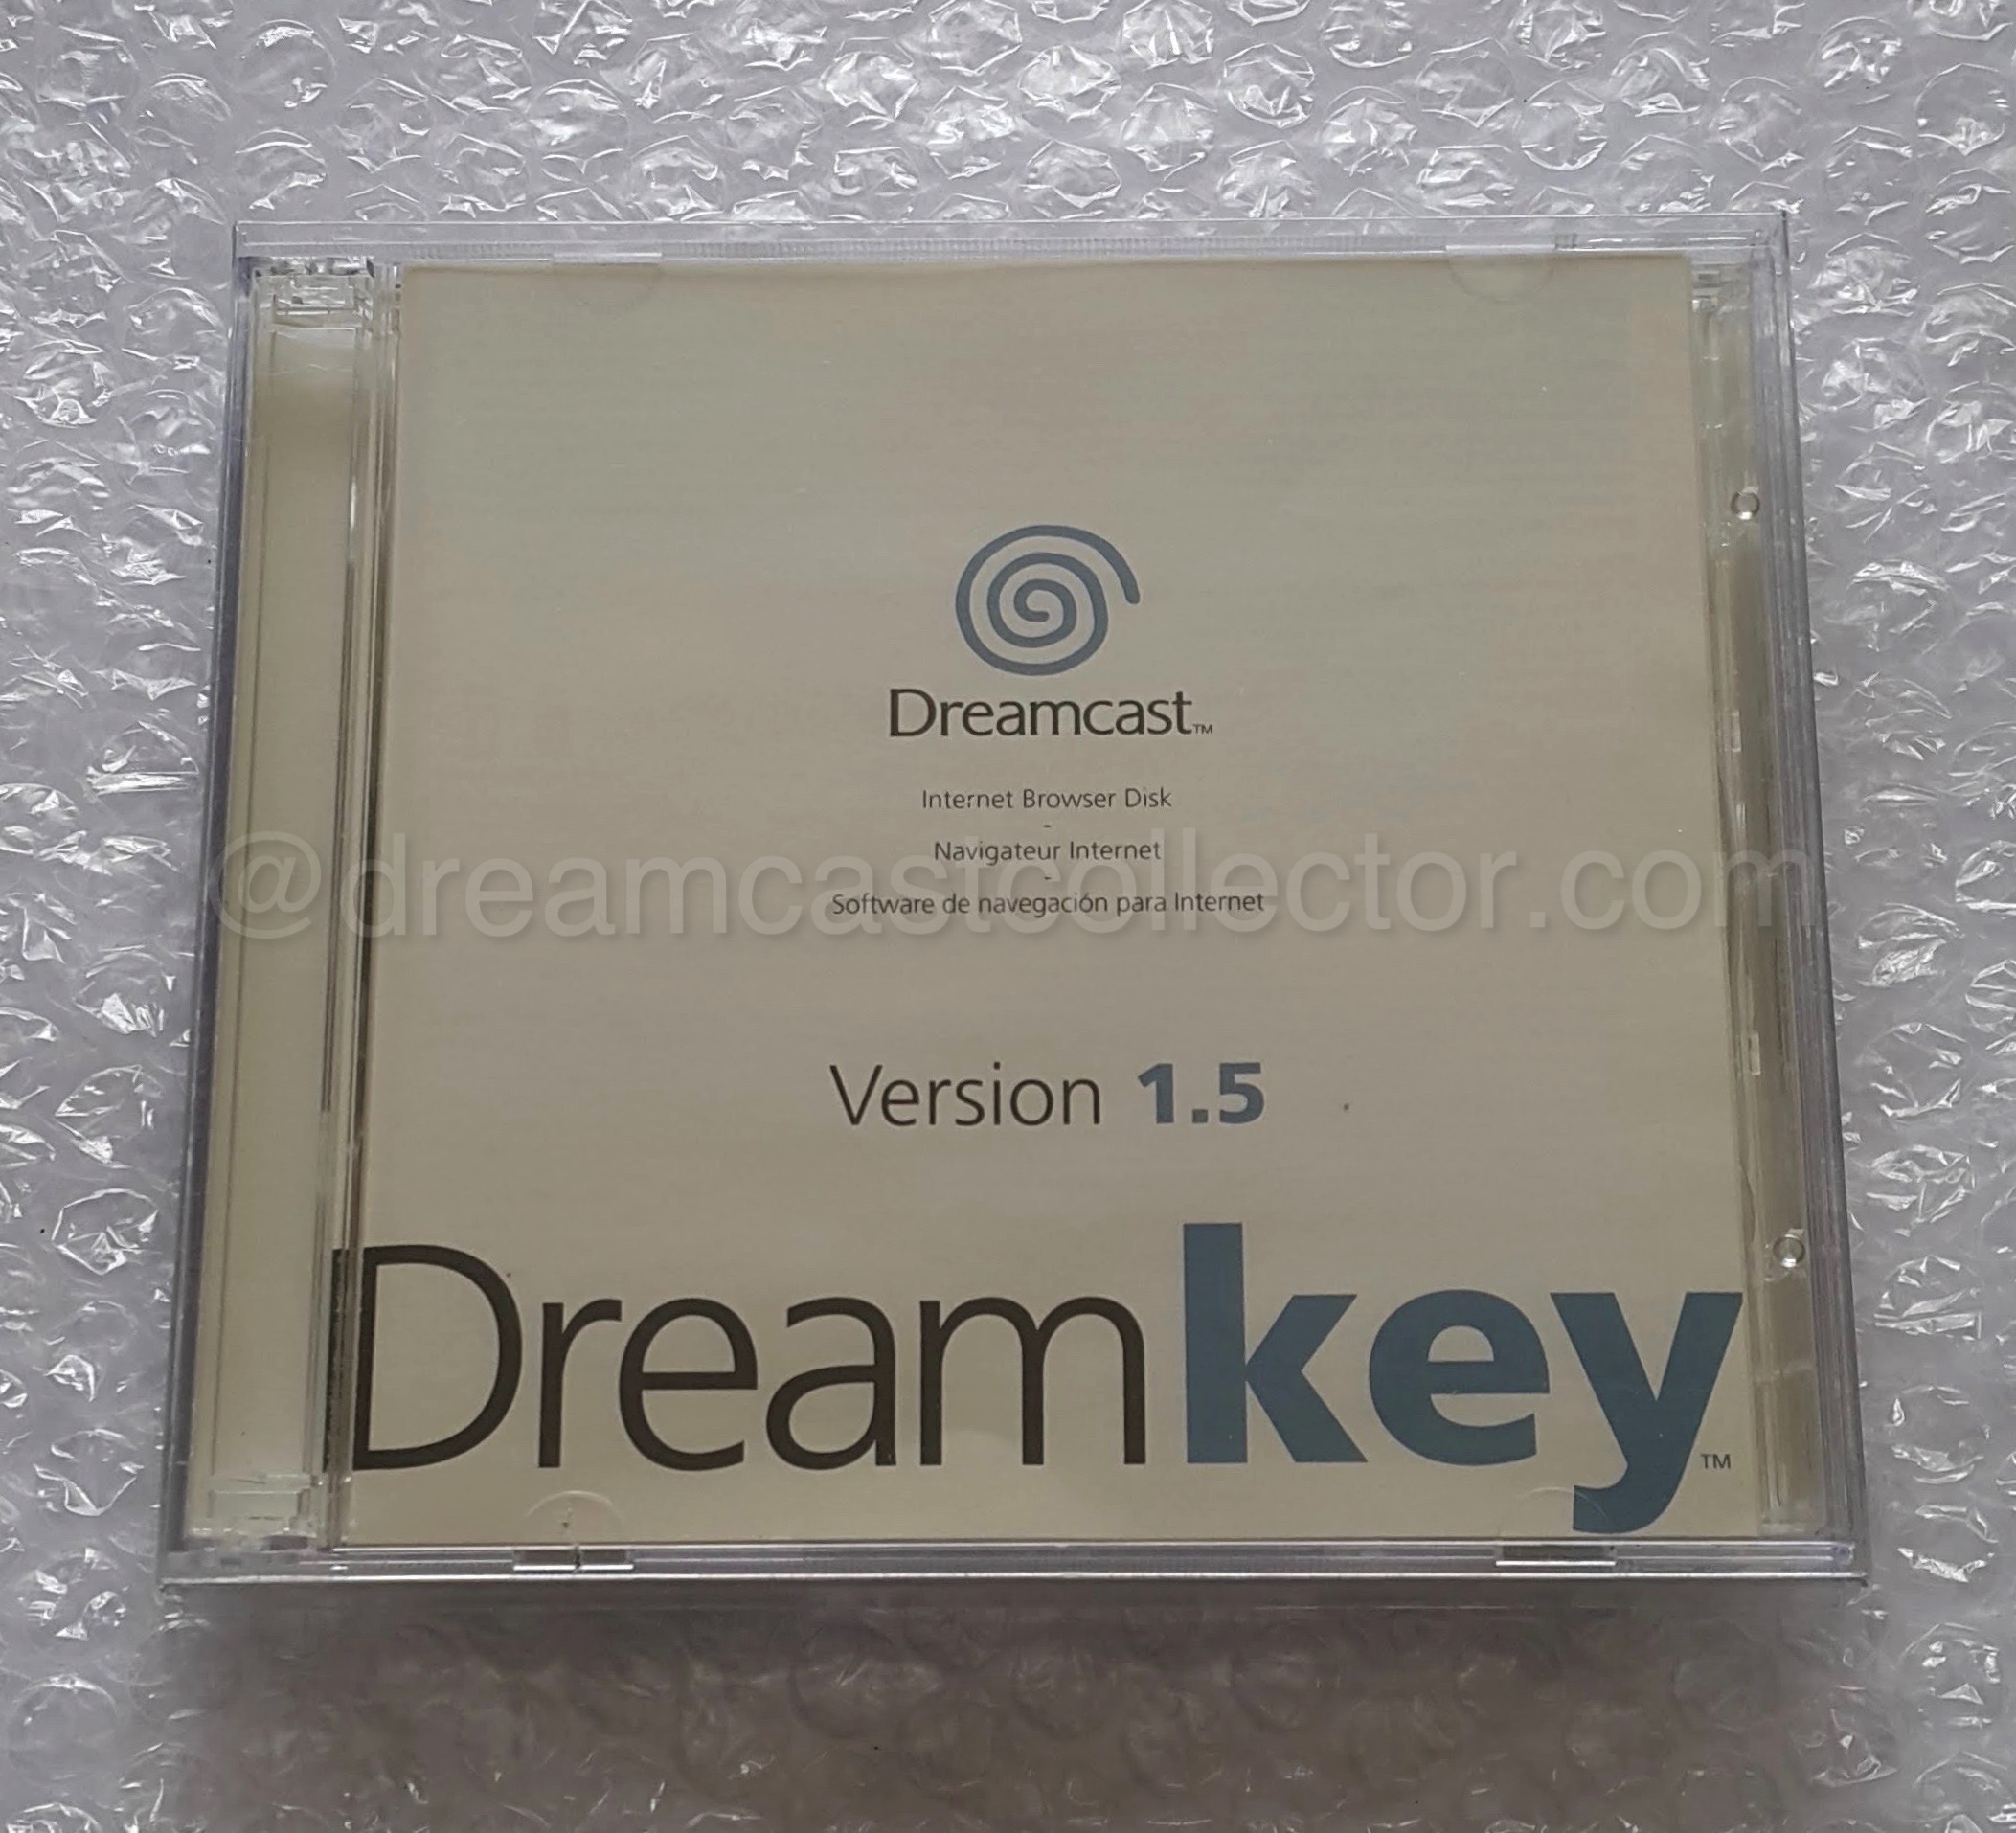 It's impossible to differentiate between the general European release of the DreamKey and this French exclusive edition by the front cover alone. This means that unfortunately this incarnation is just as bland as previously documented release.